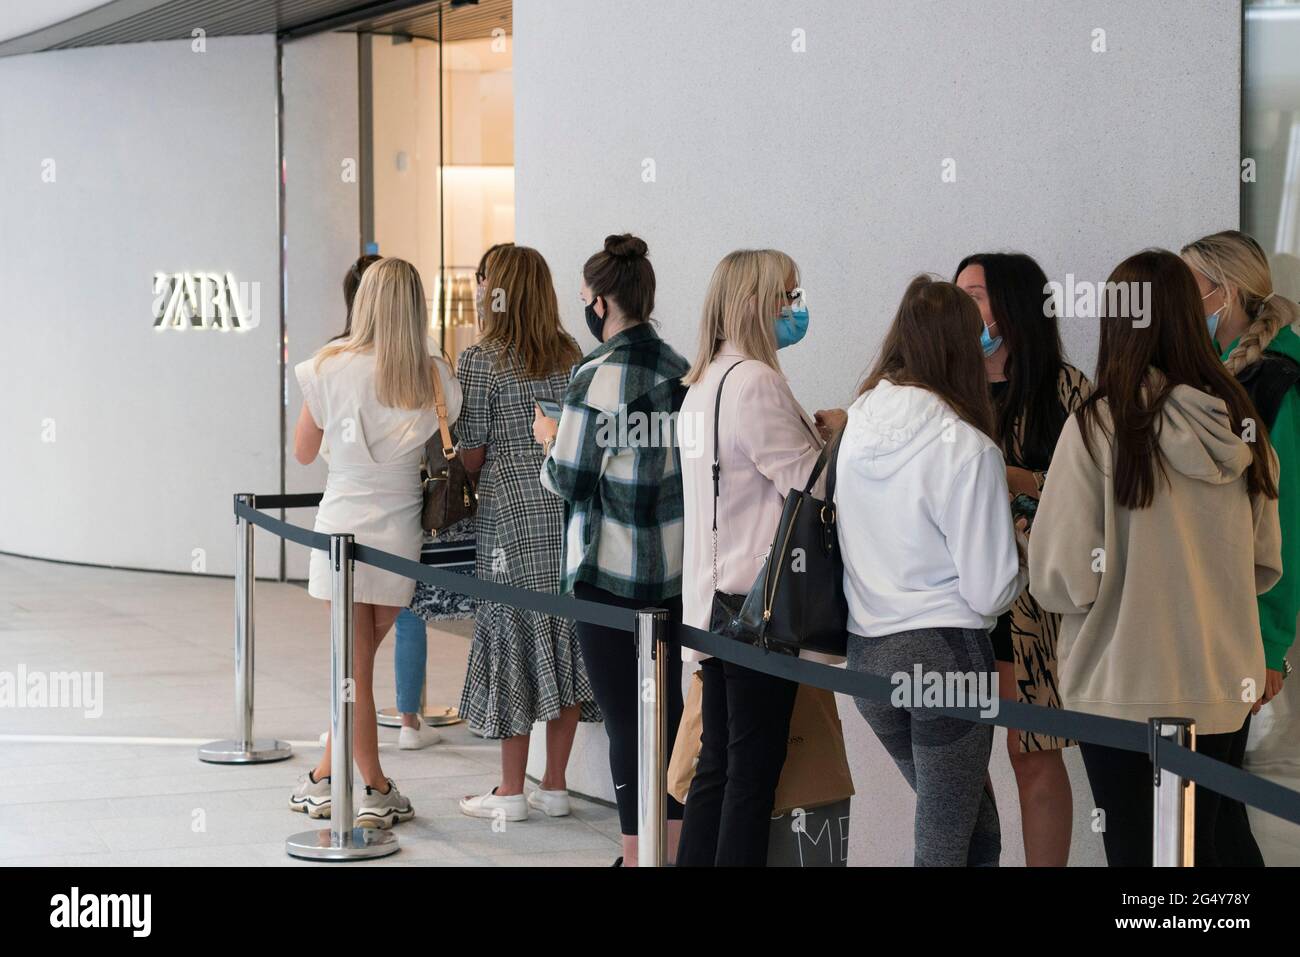 Edinburgh, Scotland, UK. 24 June 2021. First images of the new St James Quarter which opened this morning in Edinburgh. The large retail and residential complex replaced the St James Centre which occupied the site for many years. Pic; Queue of shoppers outside Zara store.  Iain Masterton/Alamy Live News Stock Photo